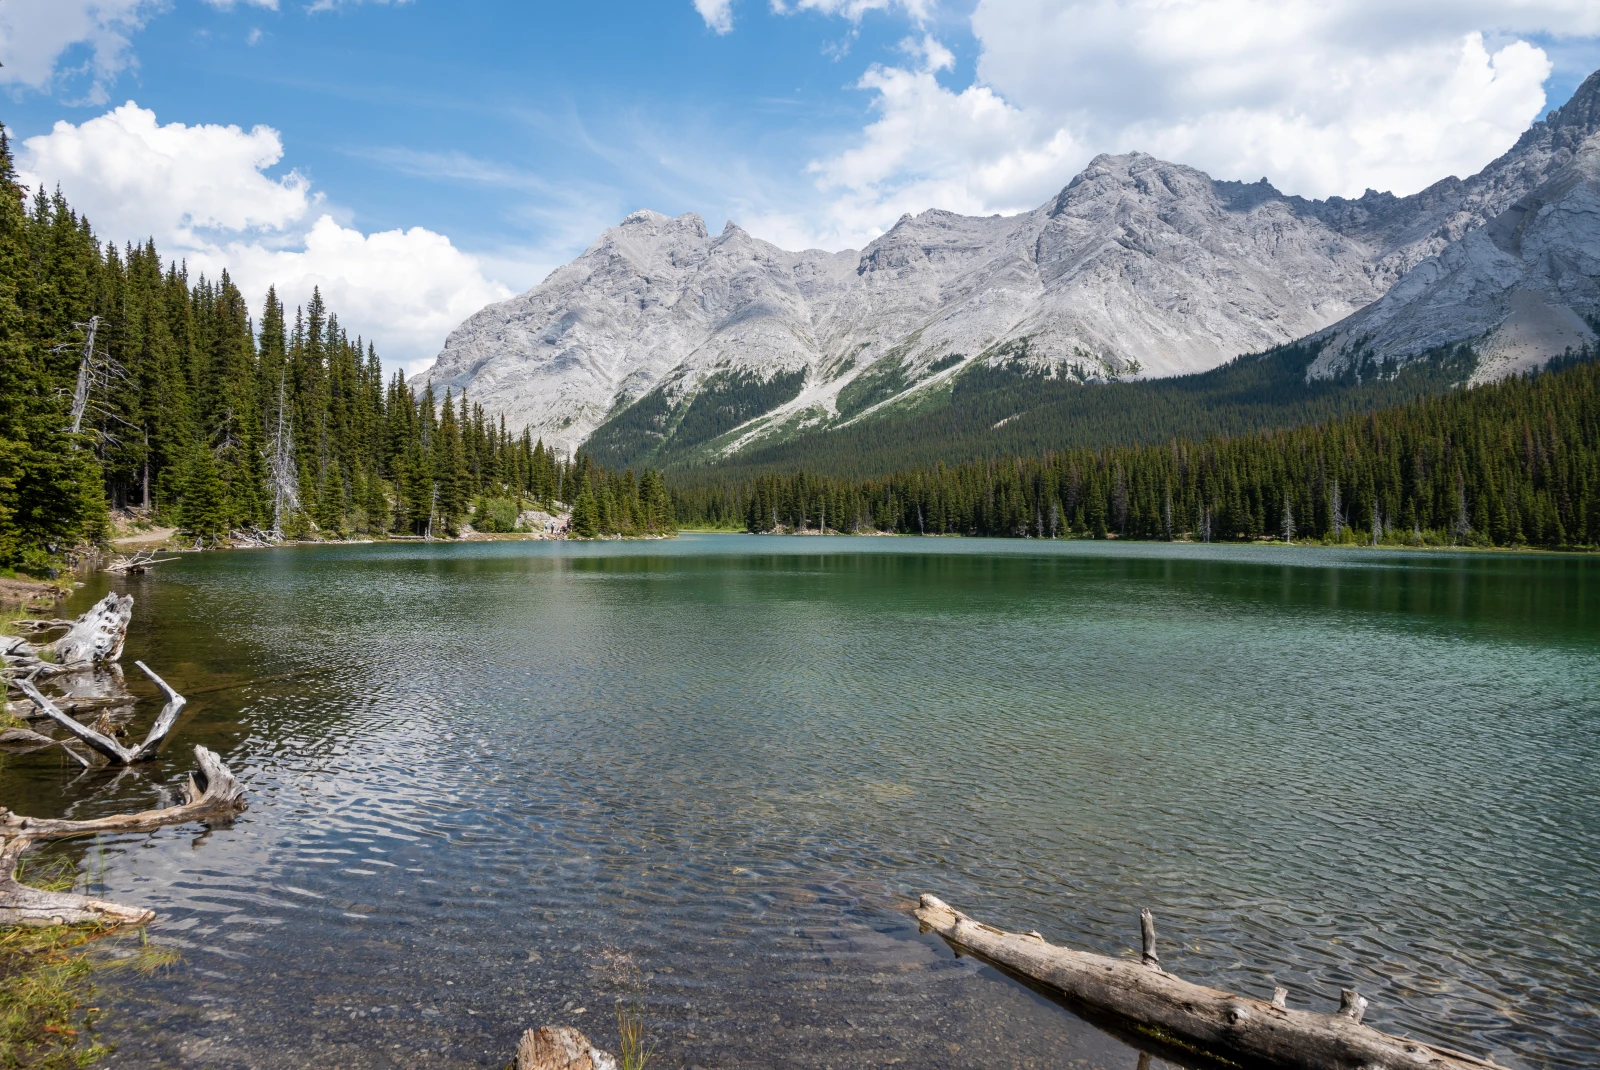 Elbow Lake is a hidden wilderness oasis in the Kananaskis Country, inviting hikers to discover pristine alpine waters amidst the breathtaking Rocky Mountain landscape.